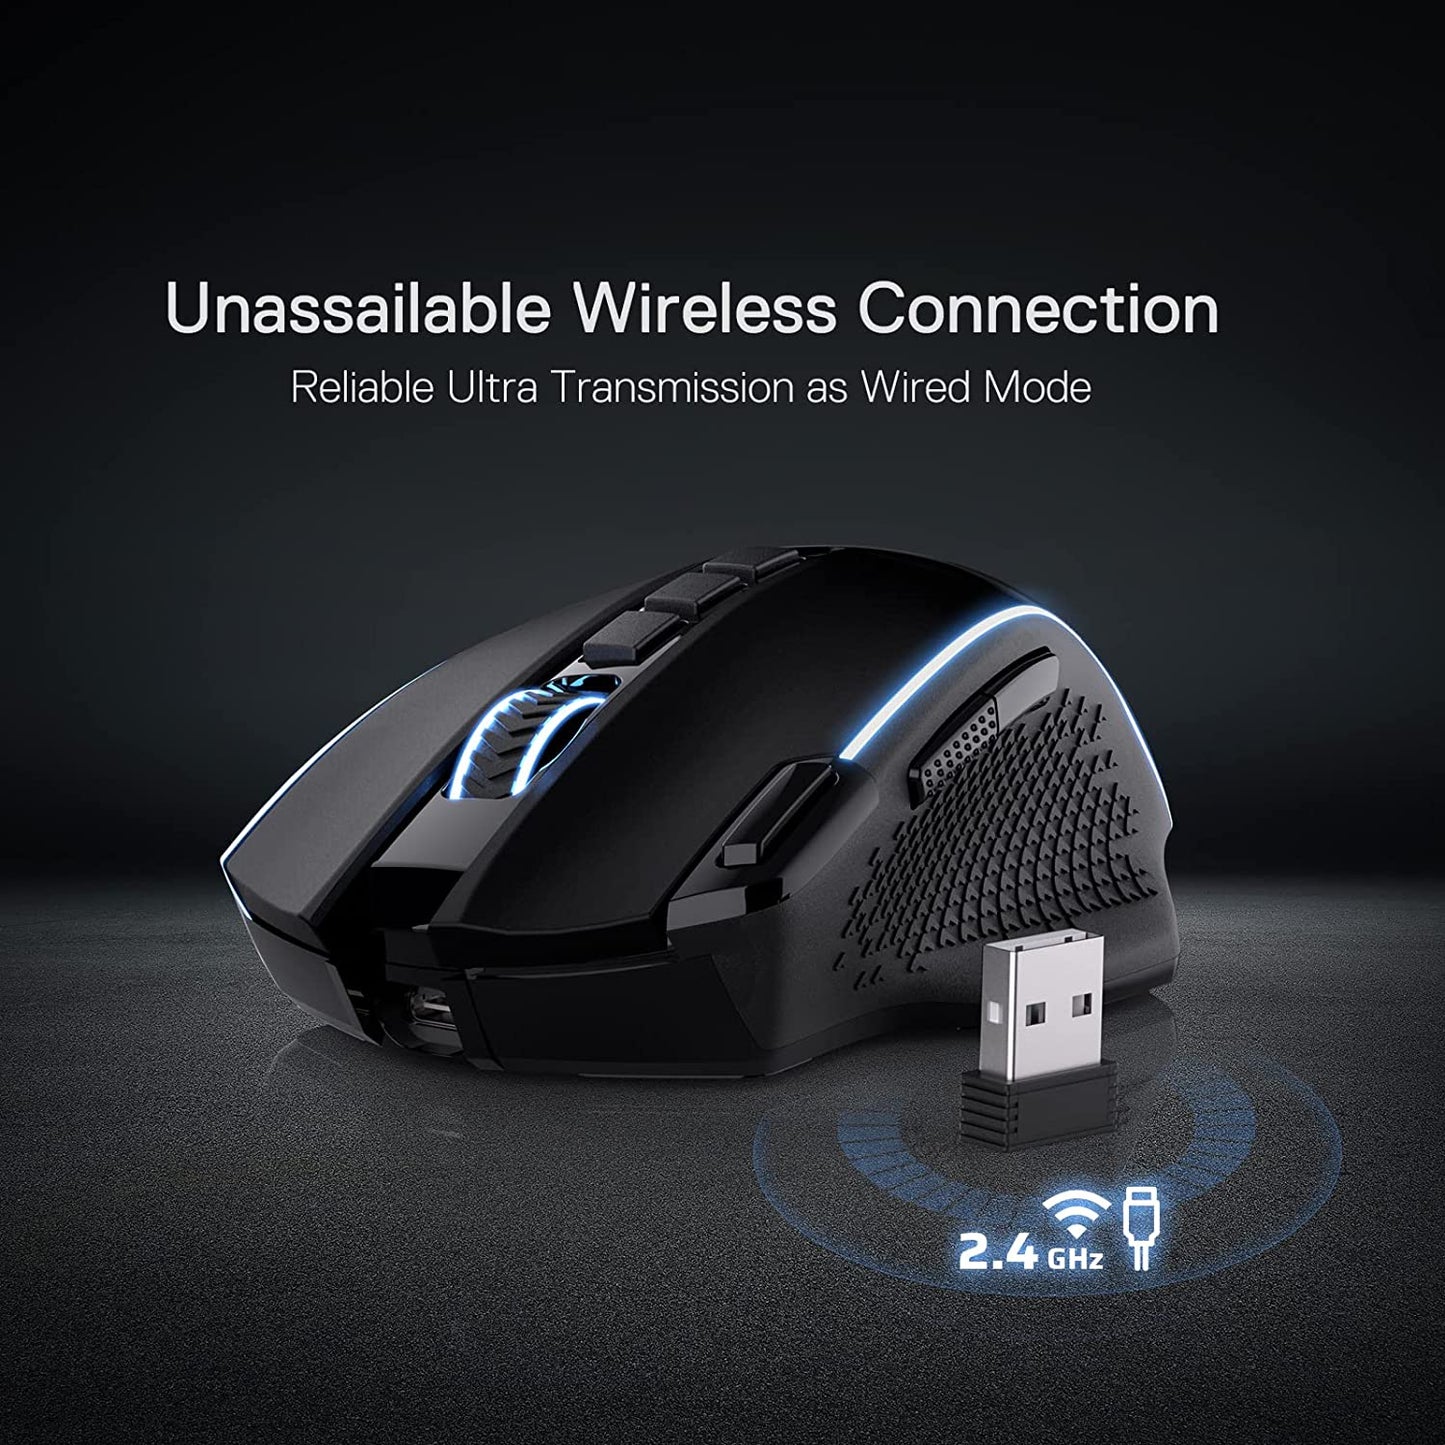 Redragon M991 RGB ENLIGHTENMENT Wireless Gaming Mouse, 19,000 DPI Wired/Wireless Gamer Mouse